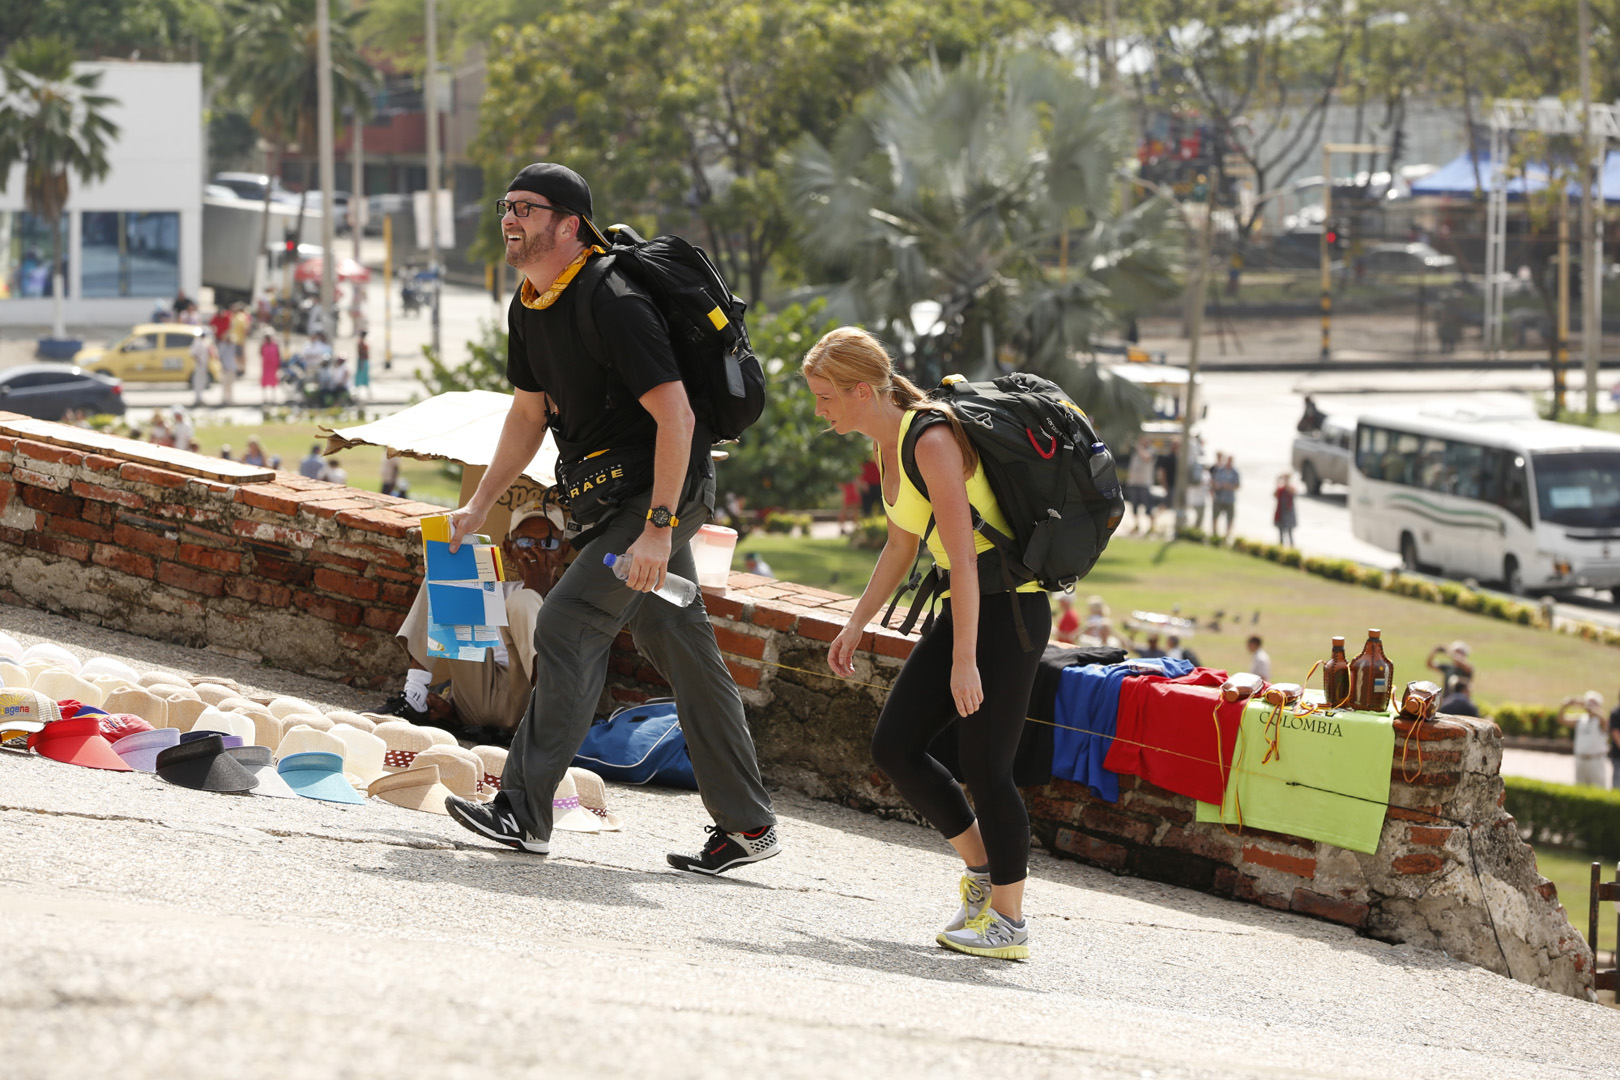 8. If given the chance, would you return for another season of The Amazing Race?